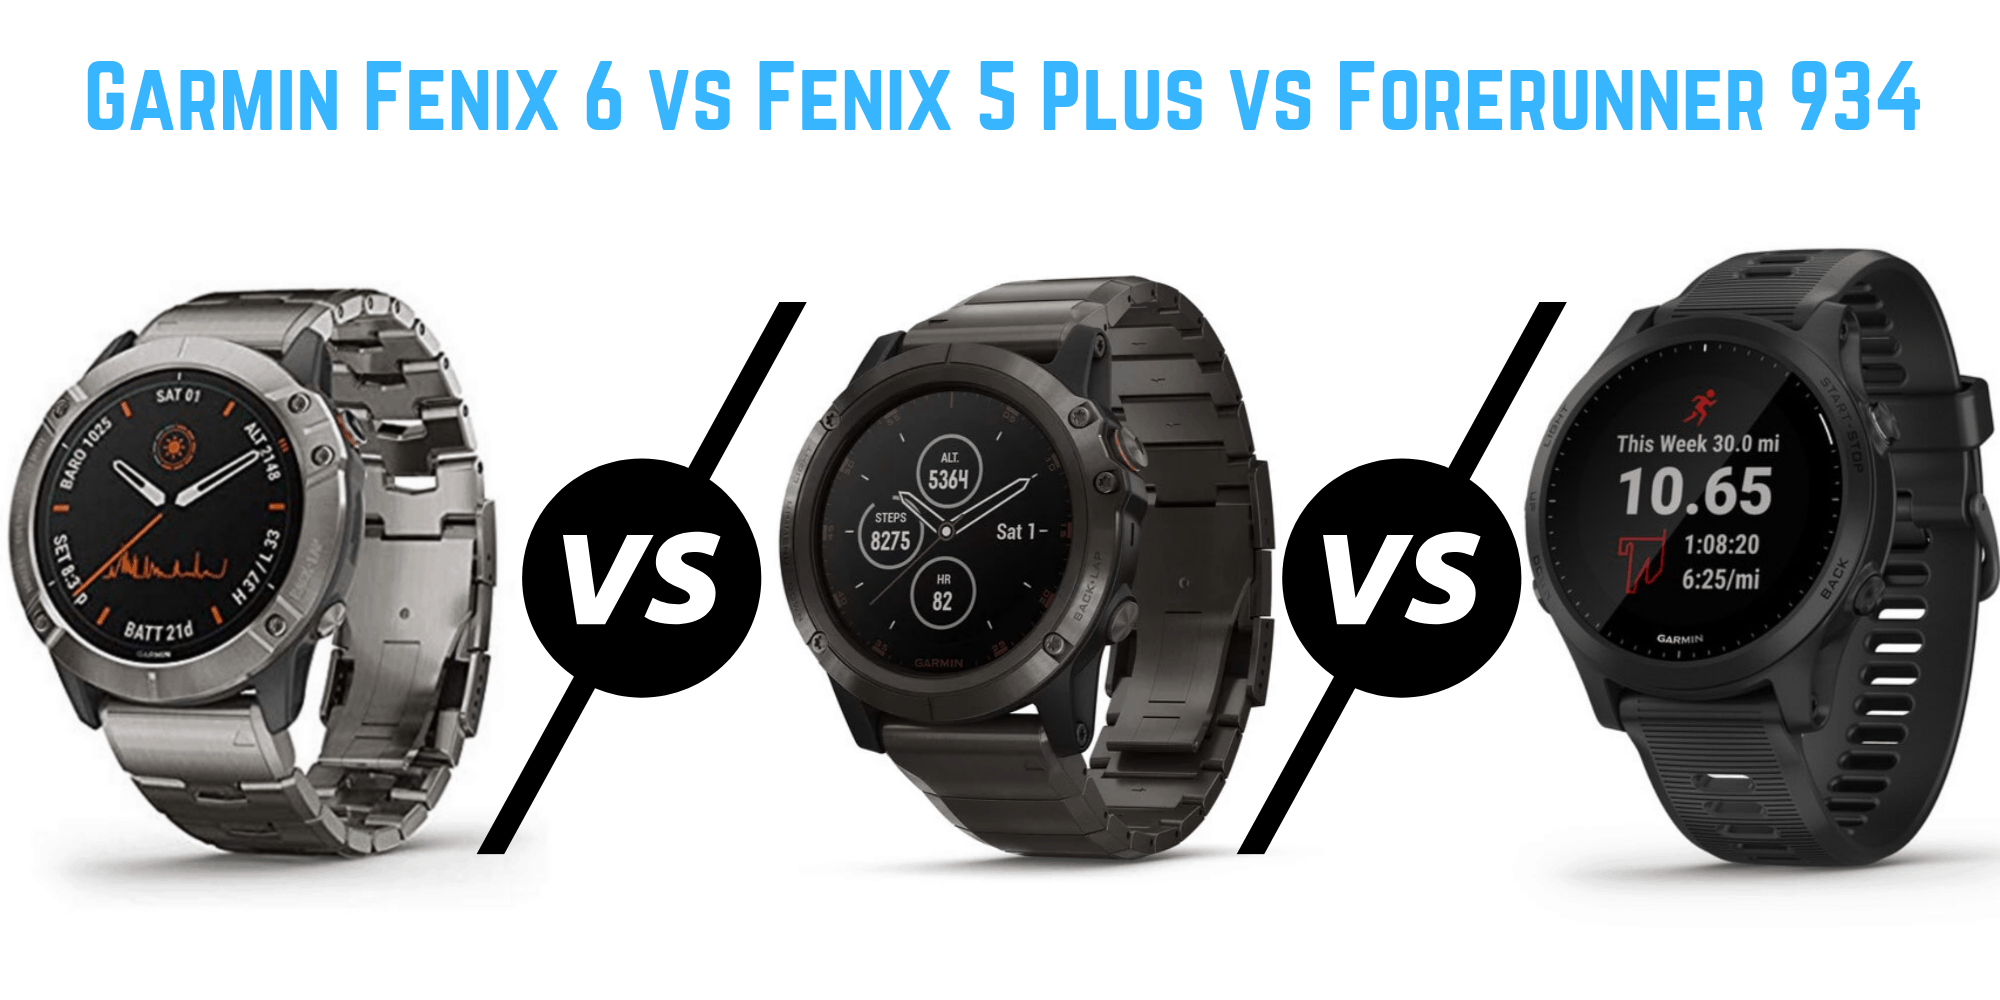 Garmin Fenix 6 vs Fenix 5 Plus vs Forerunner 945 – How does the Fenix 6 compare to Fenix 5+ and is it better than the Forerunner 945?